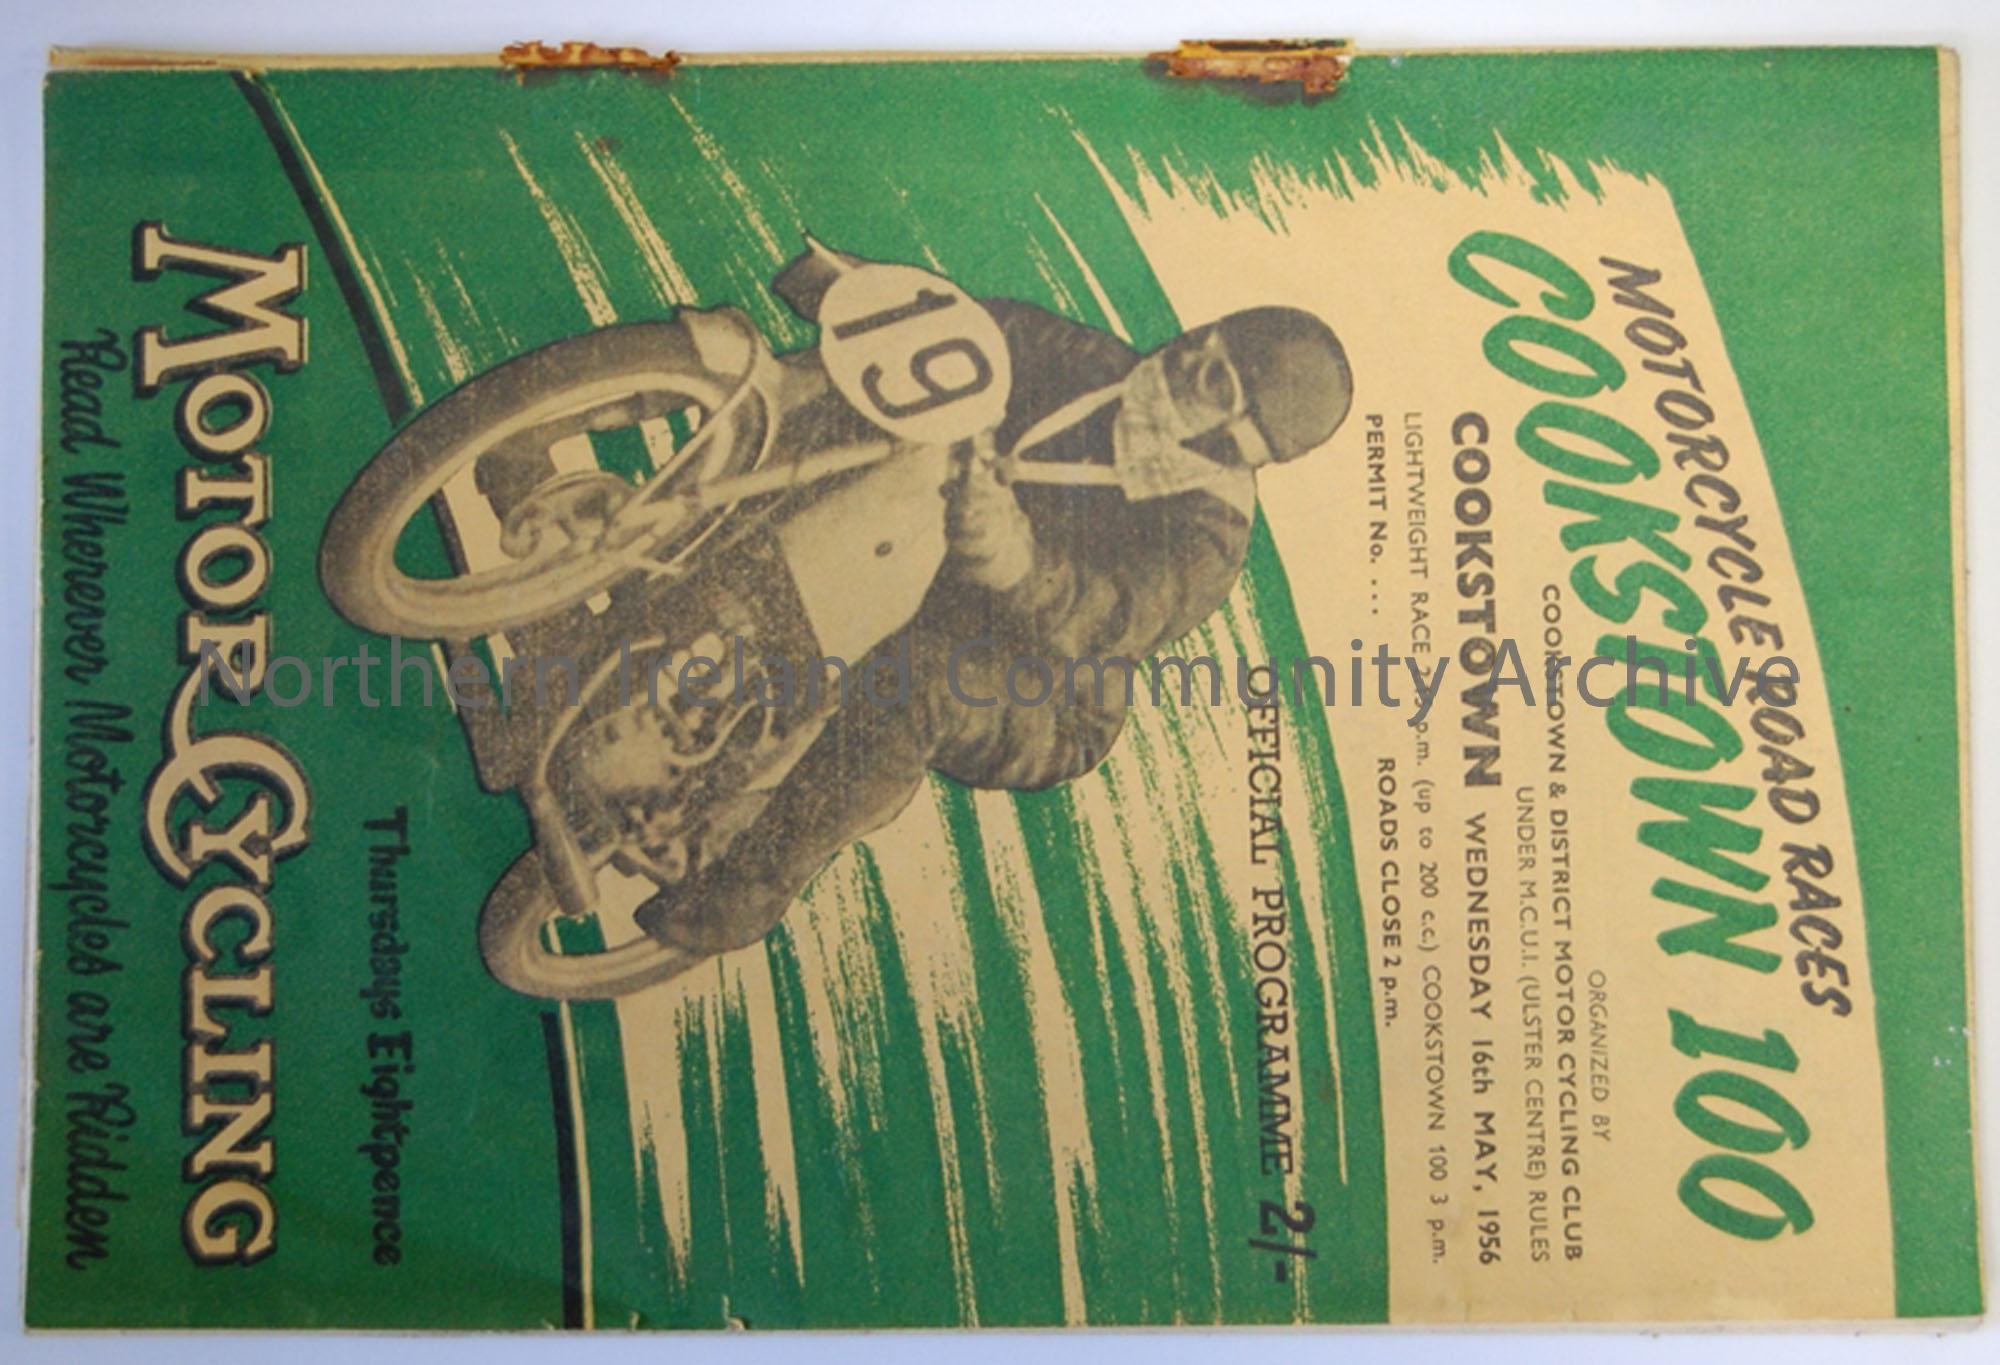 Official Programme of The Cookstown “100” Motorcycle Road Race to be held at Cookstown on Wednesday, 16th May, 1956.